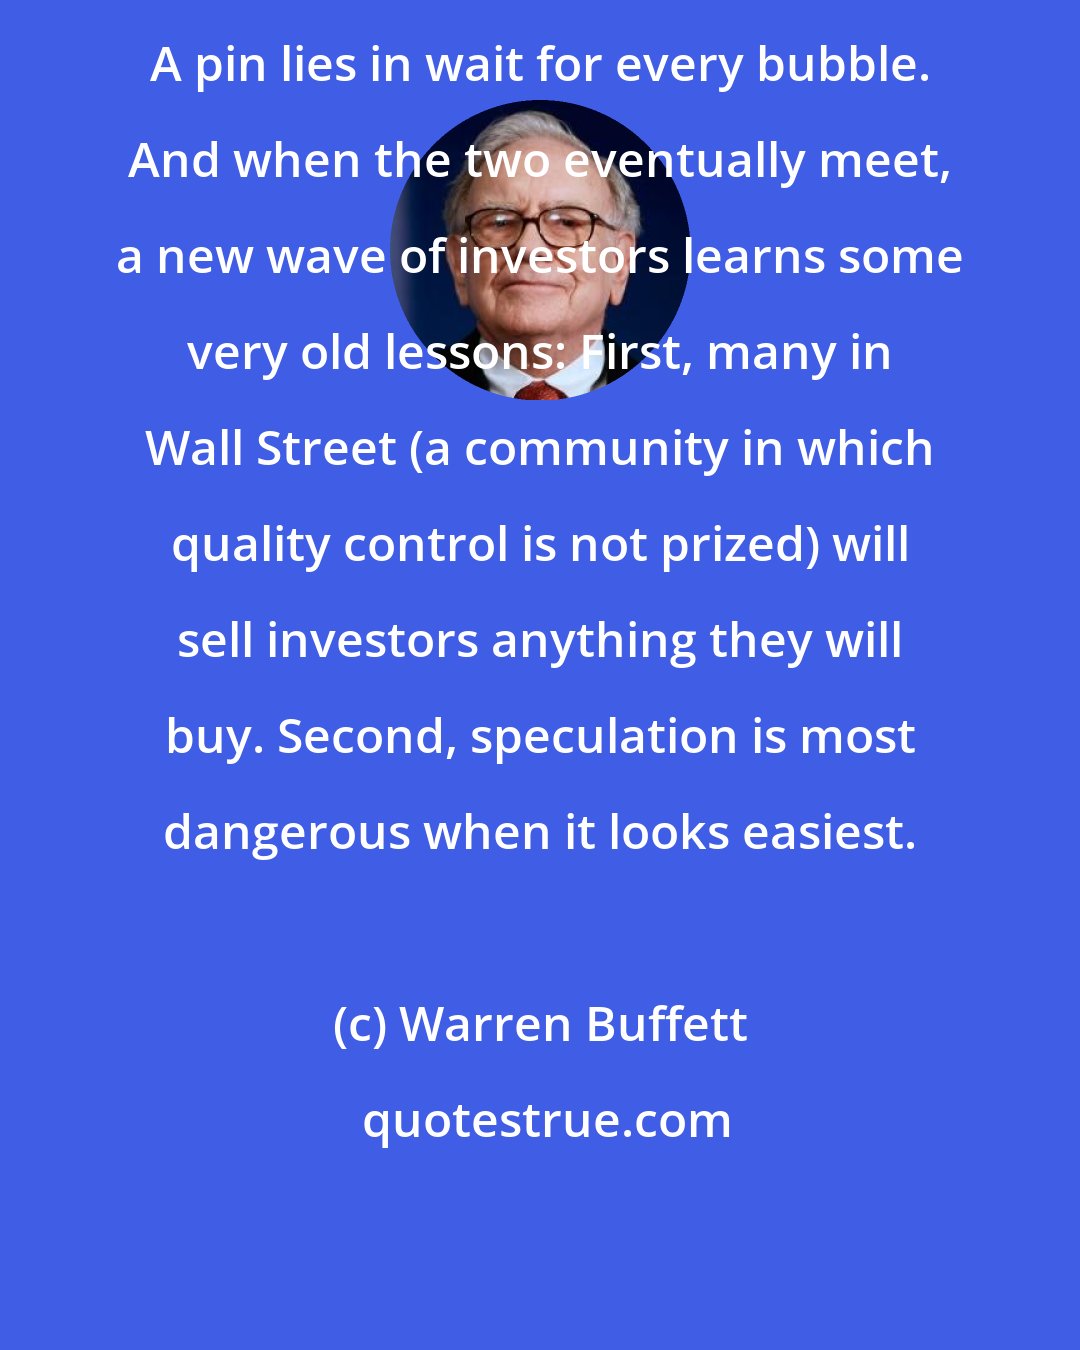 Warren Buffett: A pin lies in wait for every bubble. And when the two eventually meet, a new wave of investors learns some very old lessons: First, many in Wall Street (a community in which quality control is not prized) will sell investors anything they will buy. Second, speculation is most dangerous when it looks easiest.